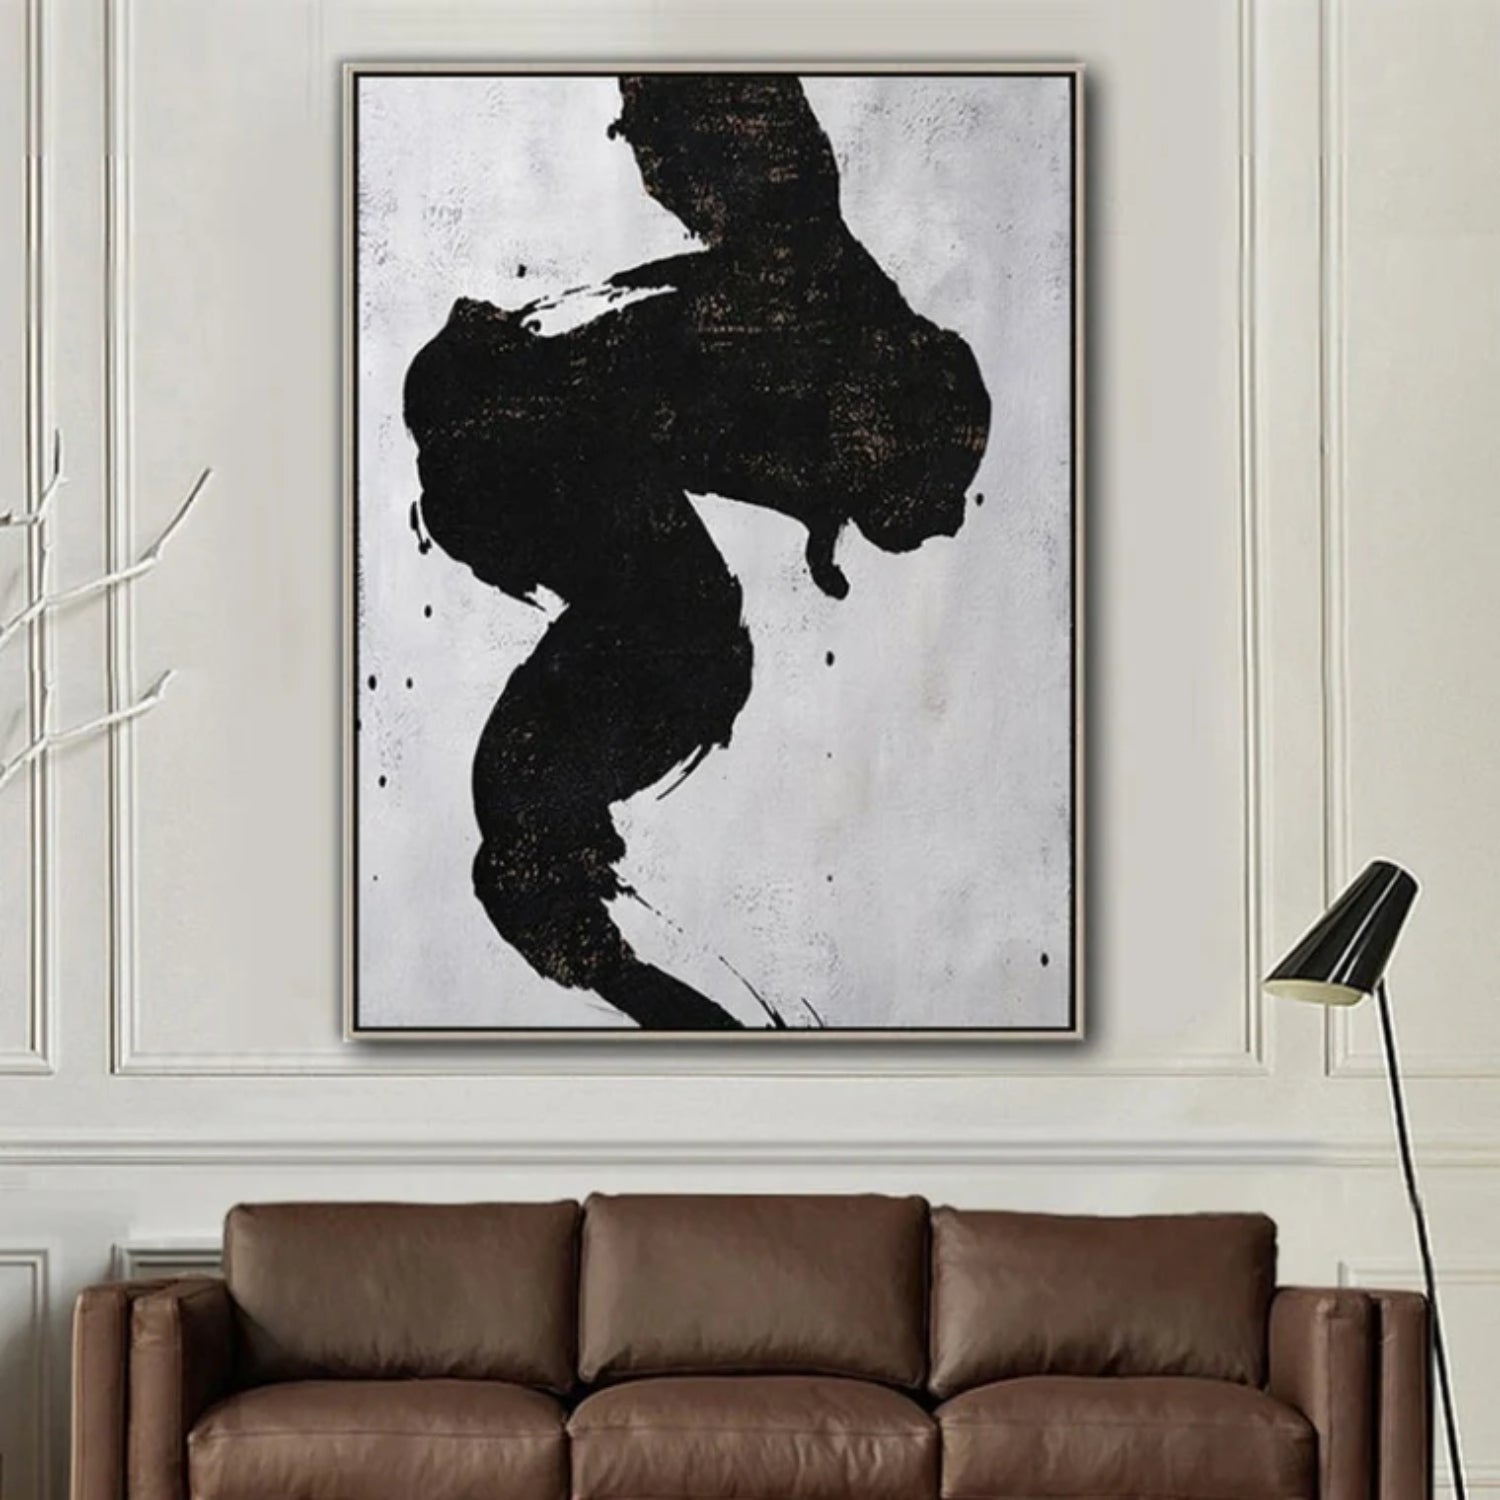 Vertical Black and White Minimalist Wall Painting